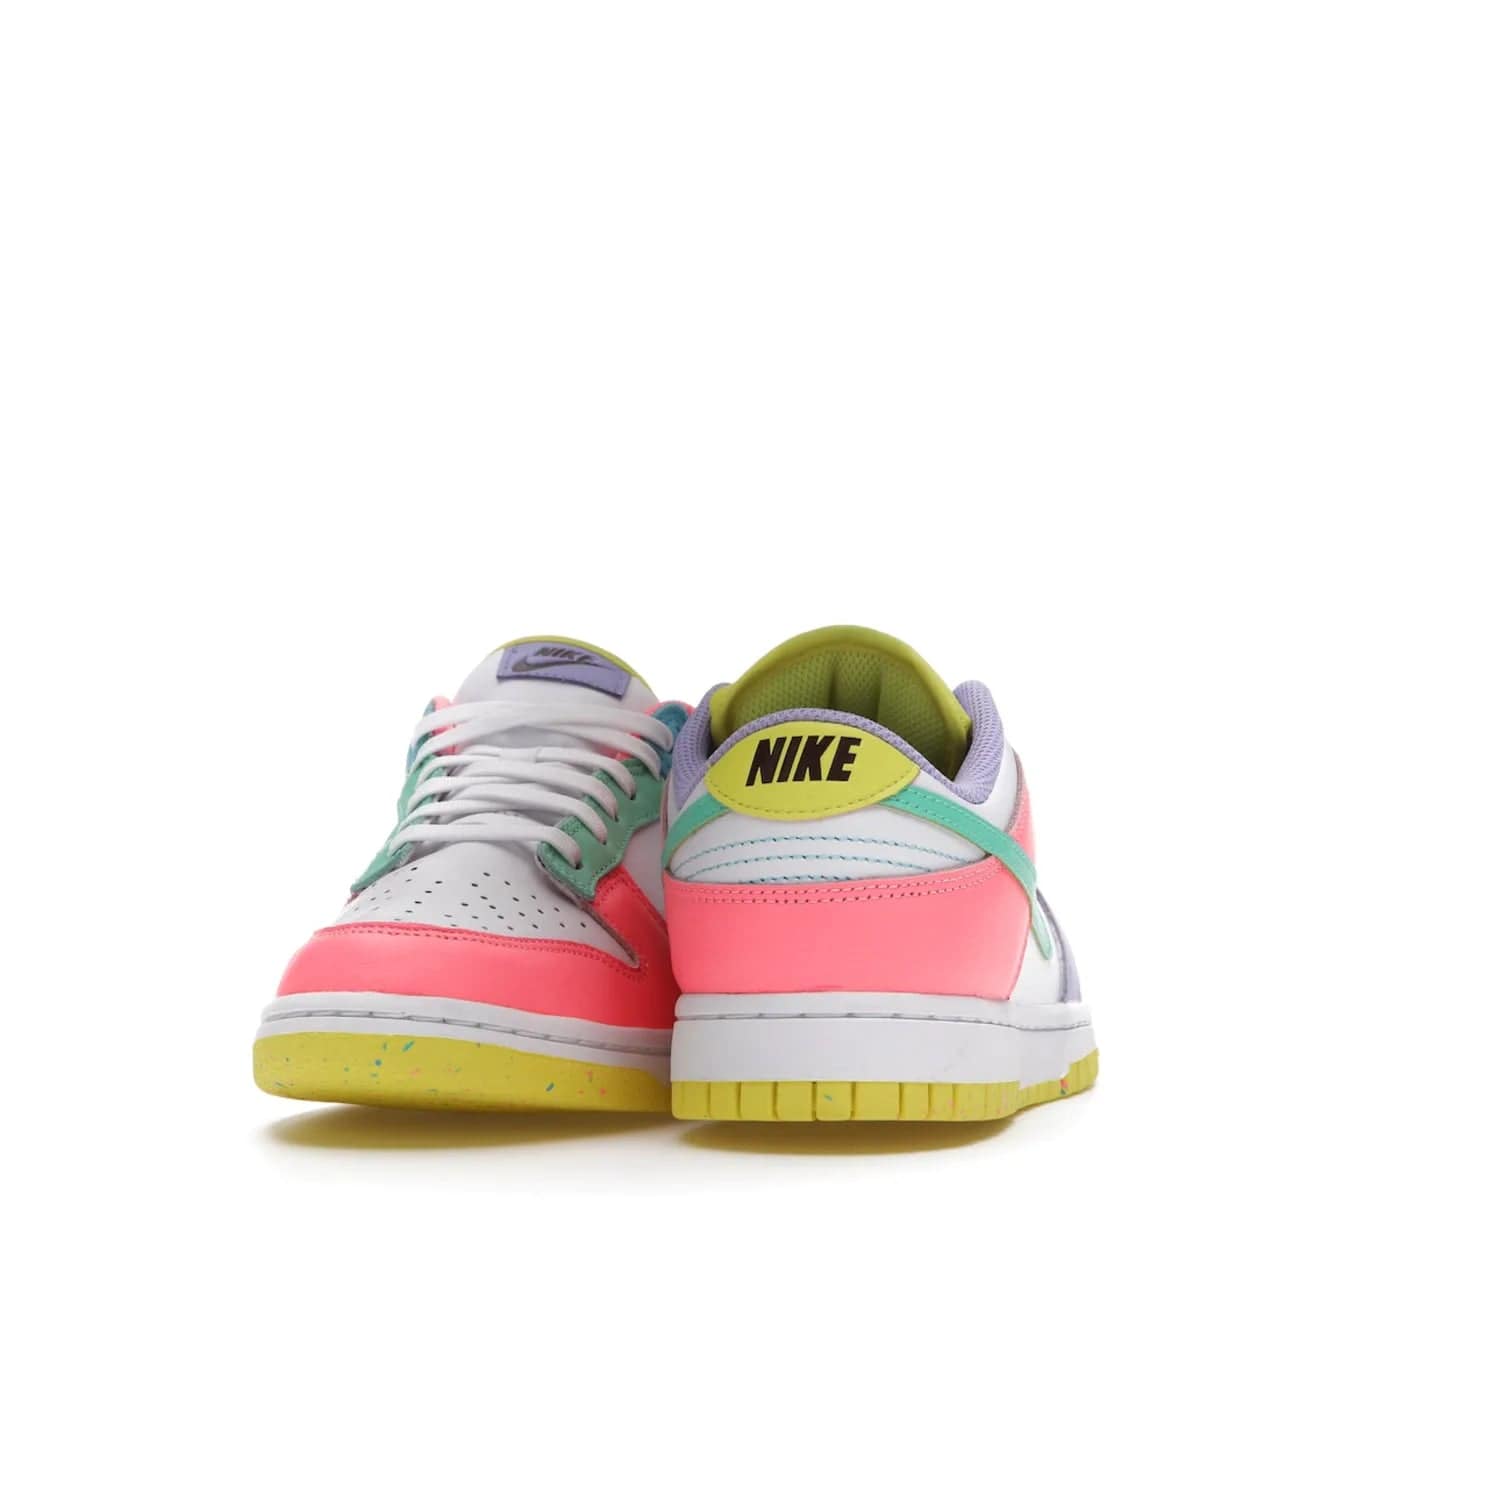 Nike Dunk Low SE Easter Candy (Women's) - Image 29 - Only at www.BallersClubKickz.com - UP
The Nike Dunk Low SE Easter Candy (Women's) brings a stylish touch to any outfit with its white leather upper, colorful accents, and multicolor speckle detailing. Shop now before they're gone.